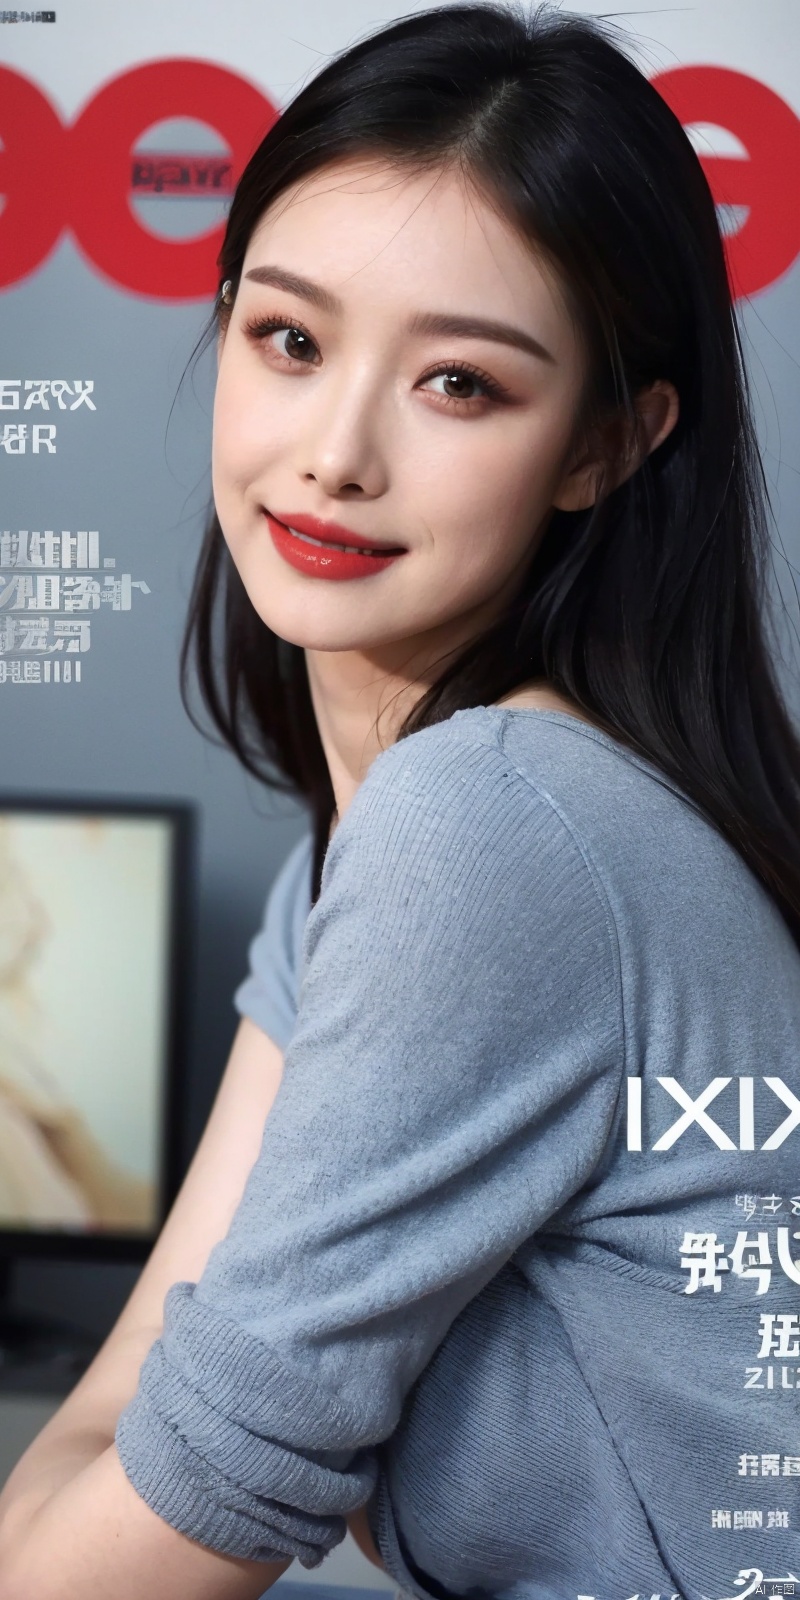  80sDBA style, fashion, (magazine: 1.3), (cover style: 1.3),Best quality, masterpiece, high-resolution, 4K, 1 girl, smile, exquisite makeup,shirt,jean,jacket , lace, tv,boombox
,, , ,long_hair